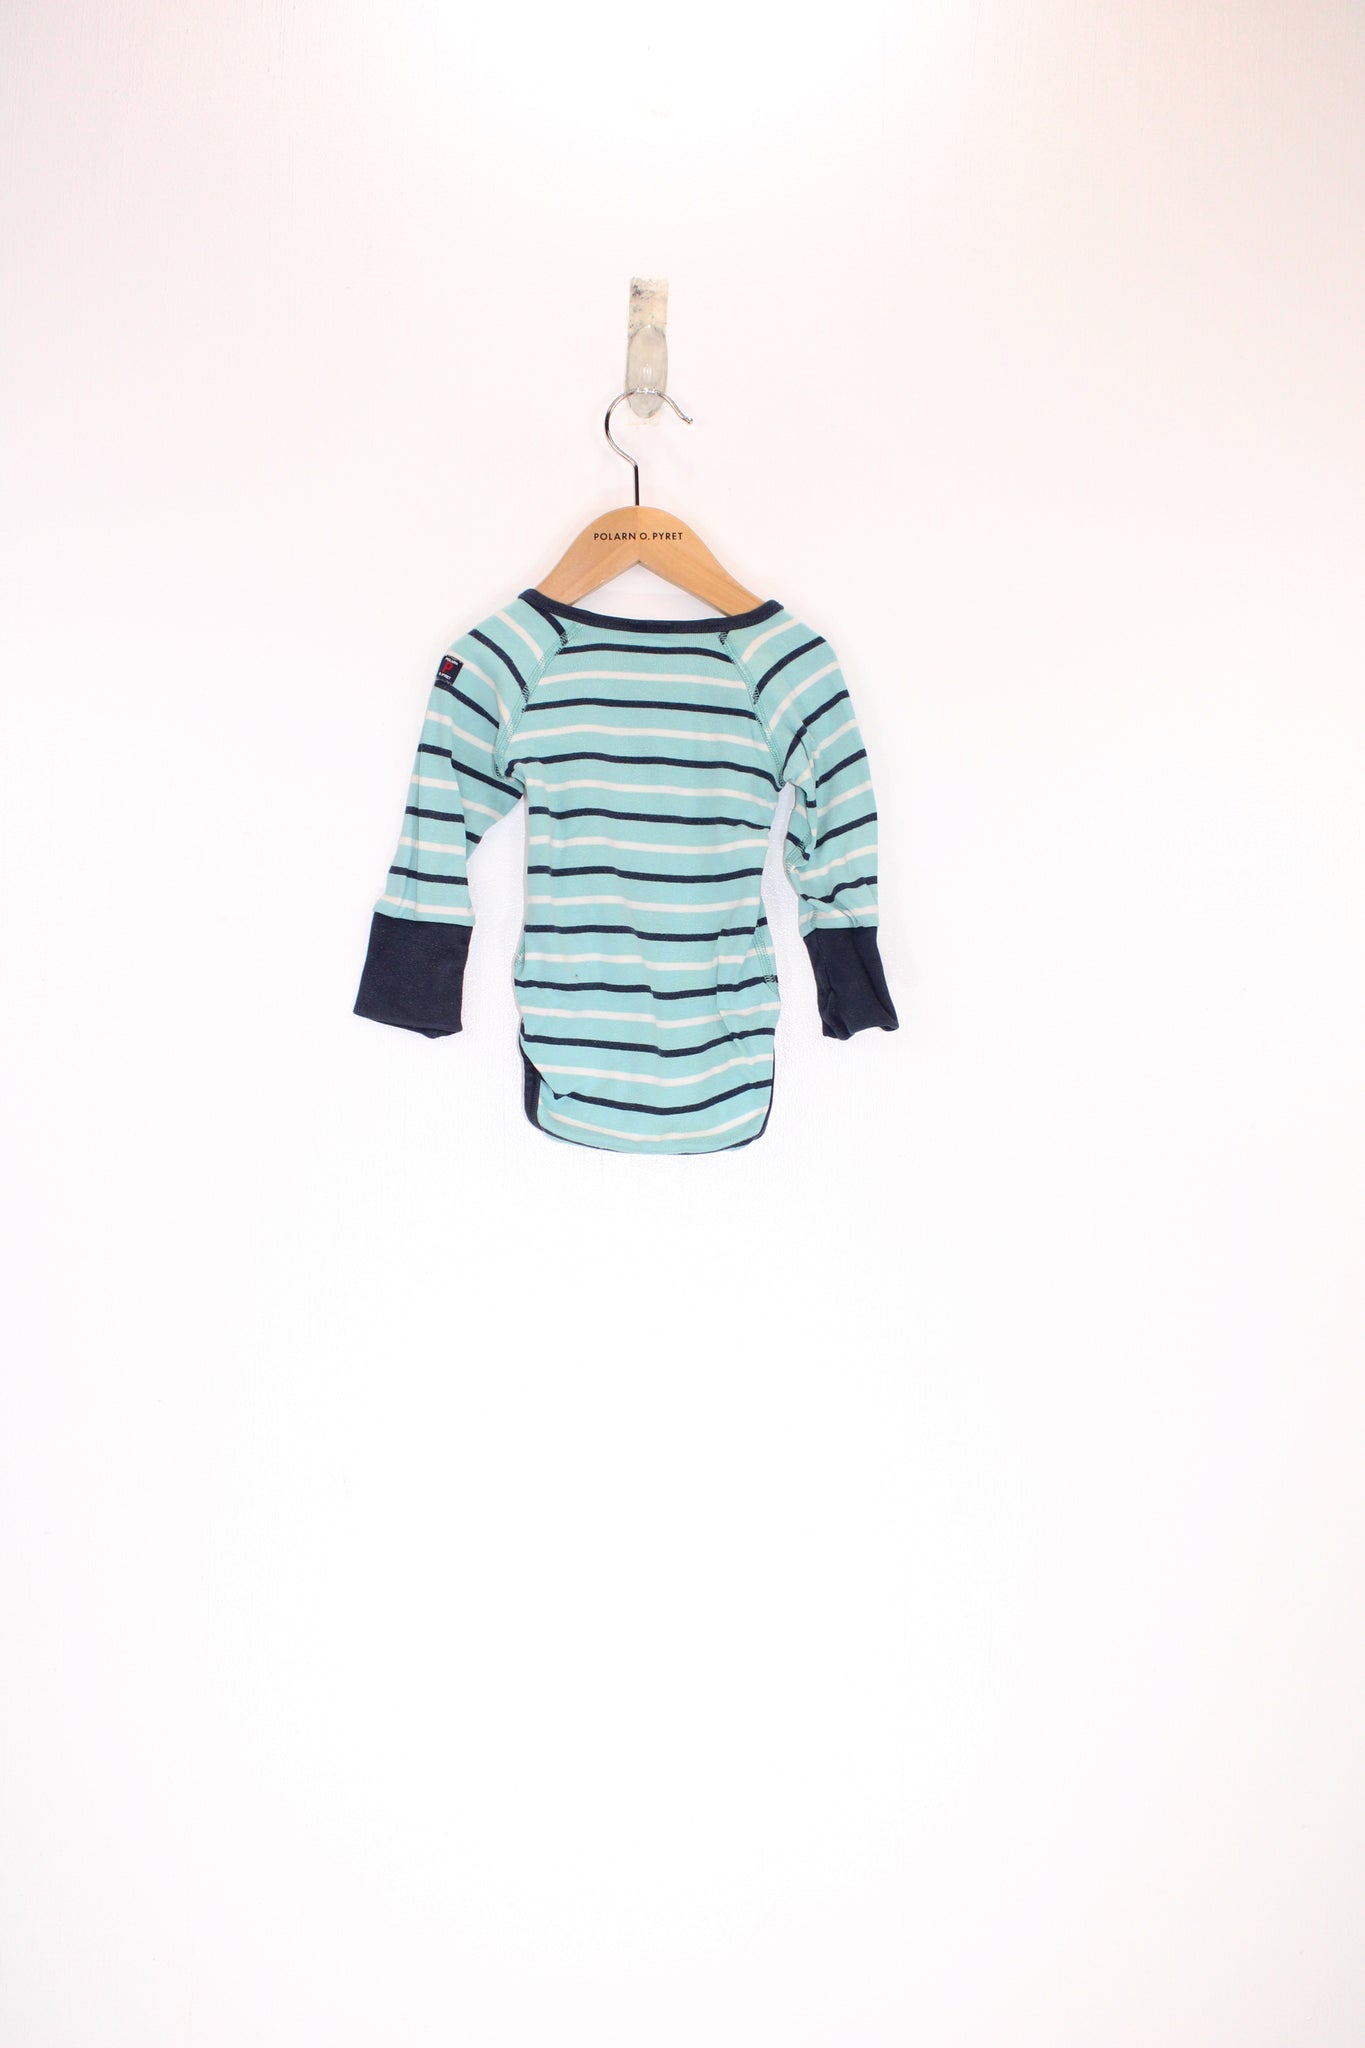 Baby Long Sleeved Body Suit 2-4m / 62